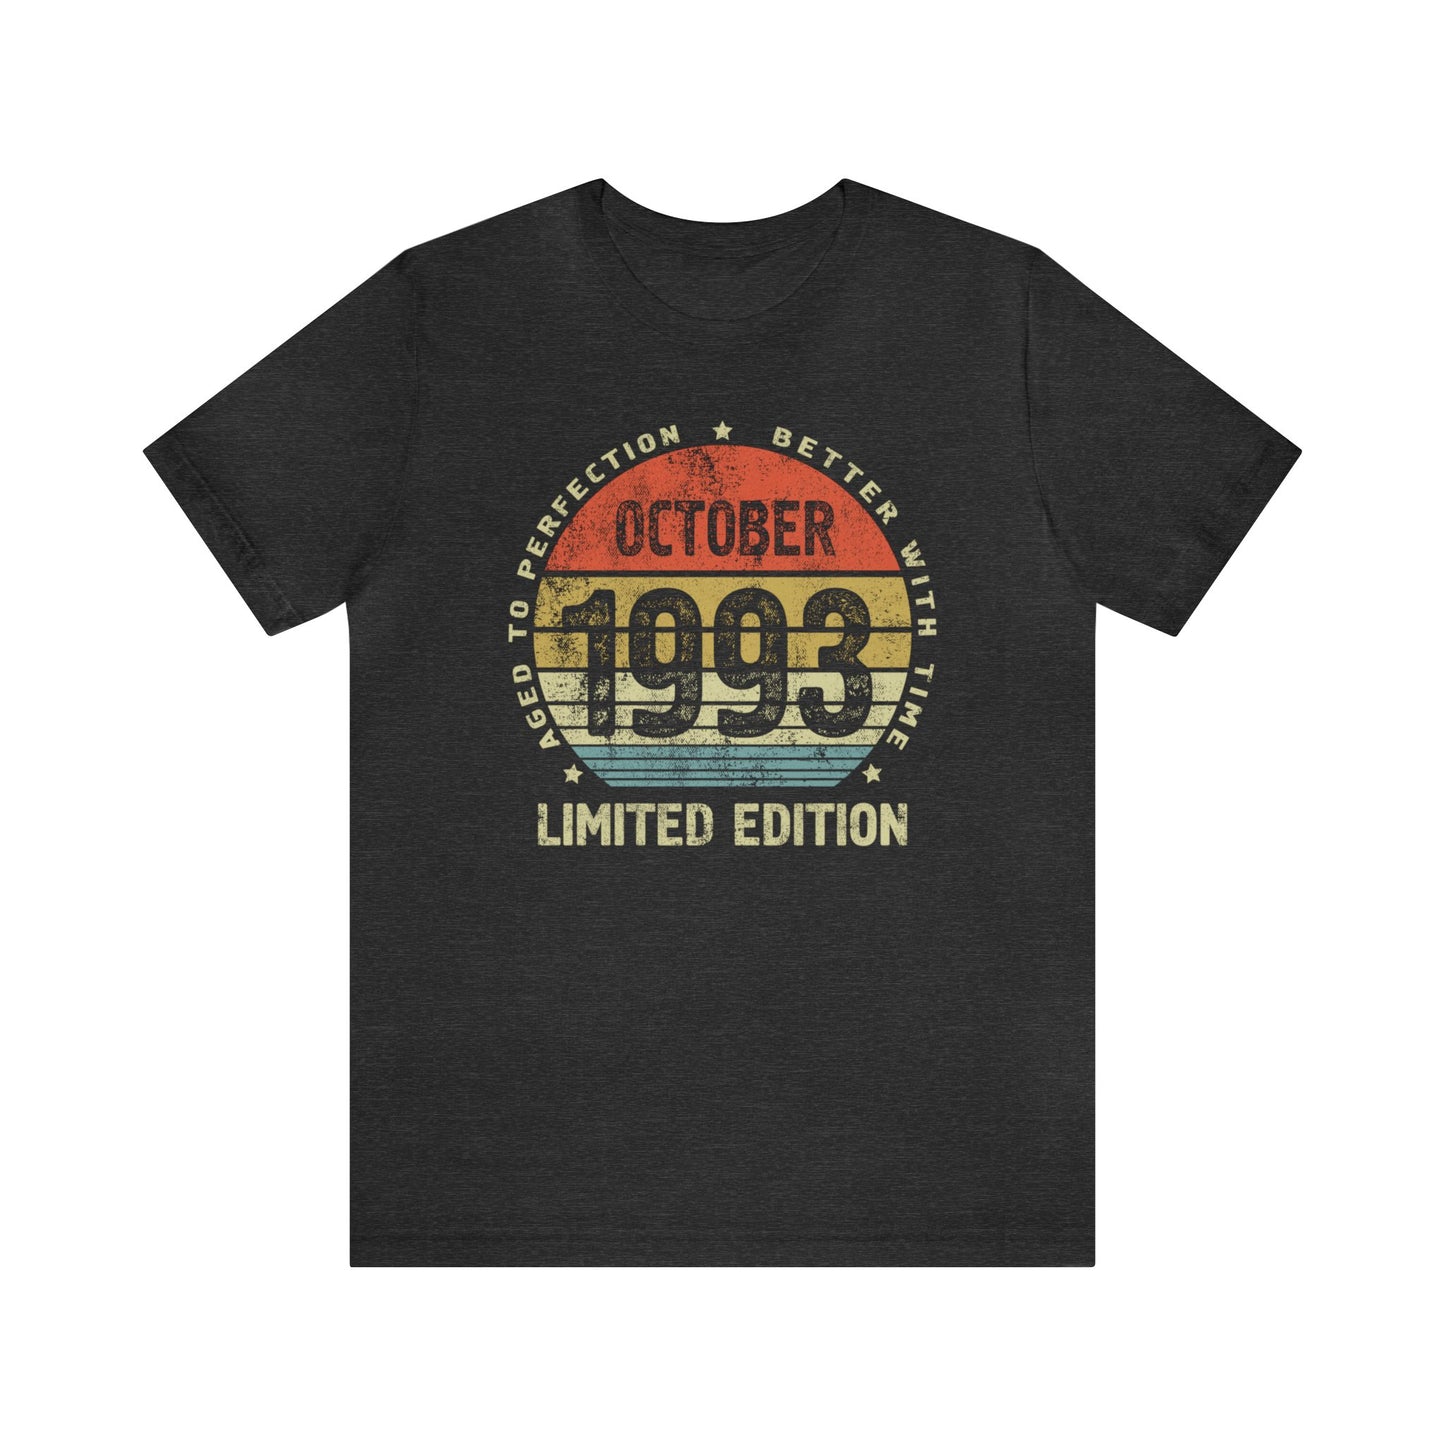 30th birthday gift for women or men October 1993 birthday shirt for sister or brother